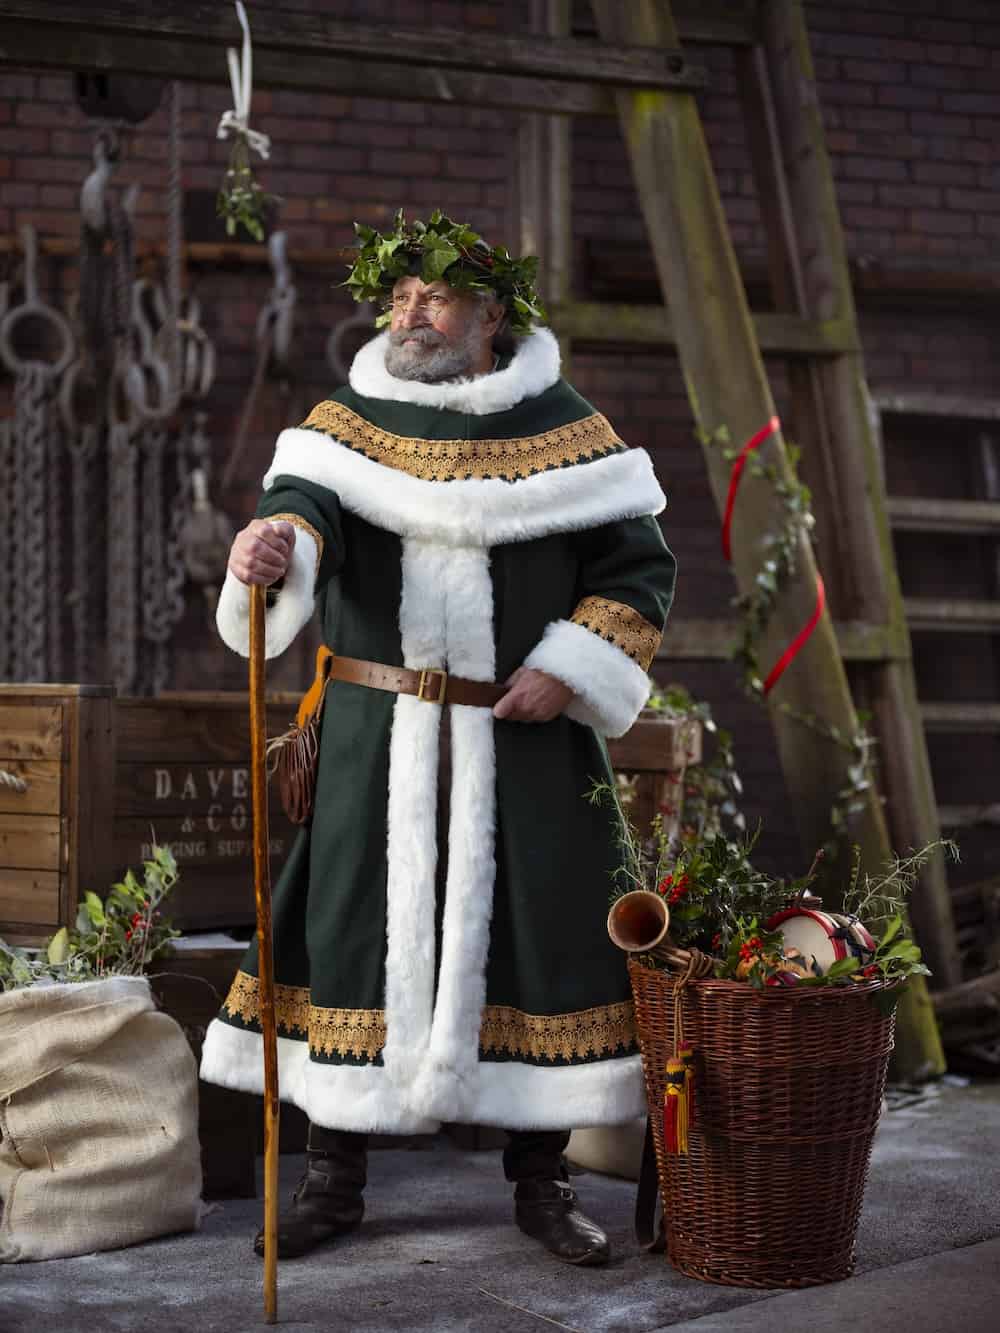 Old Father Christmas wearing green robes at the SS Great Britain dockyard